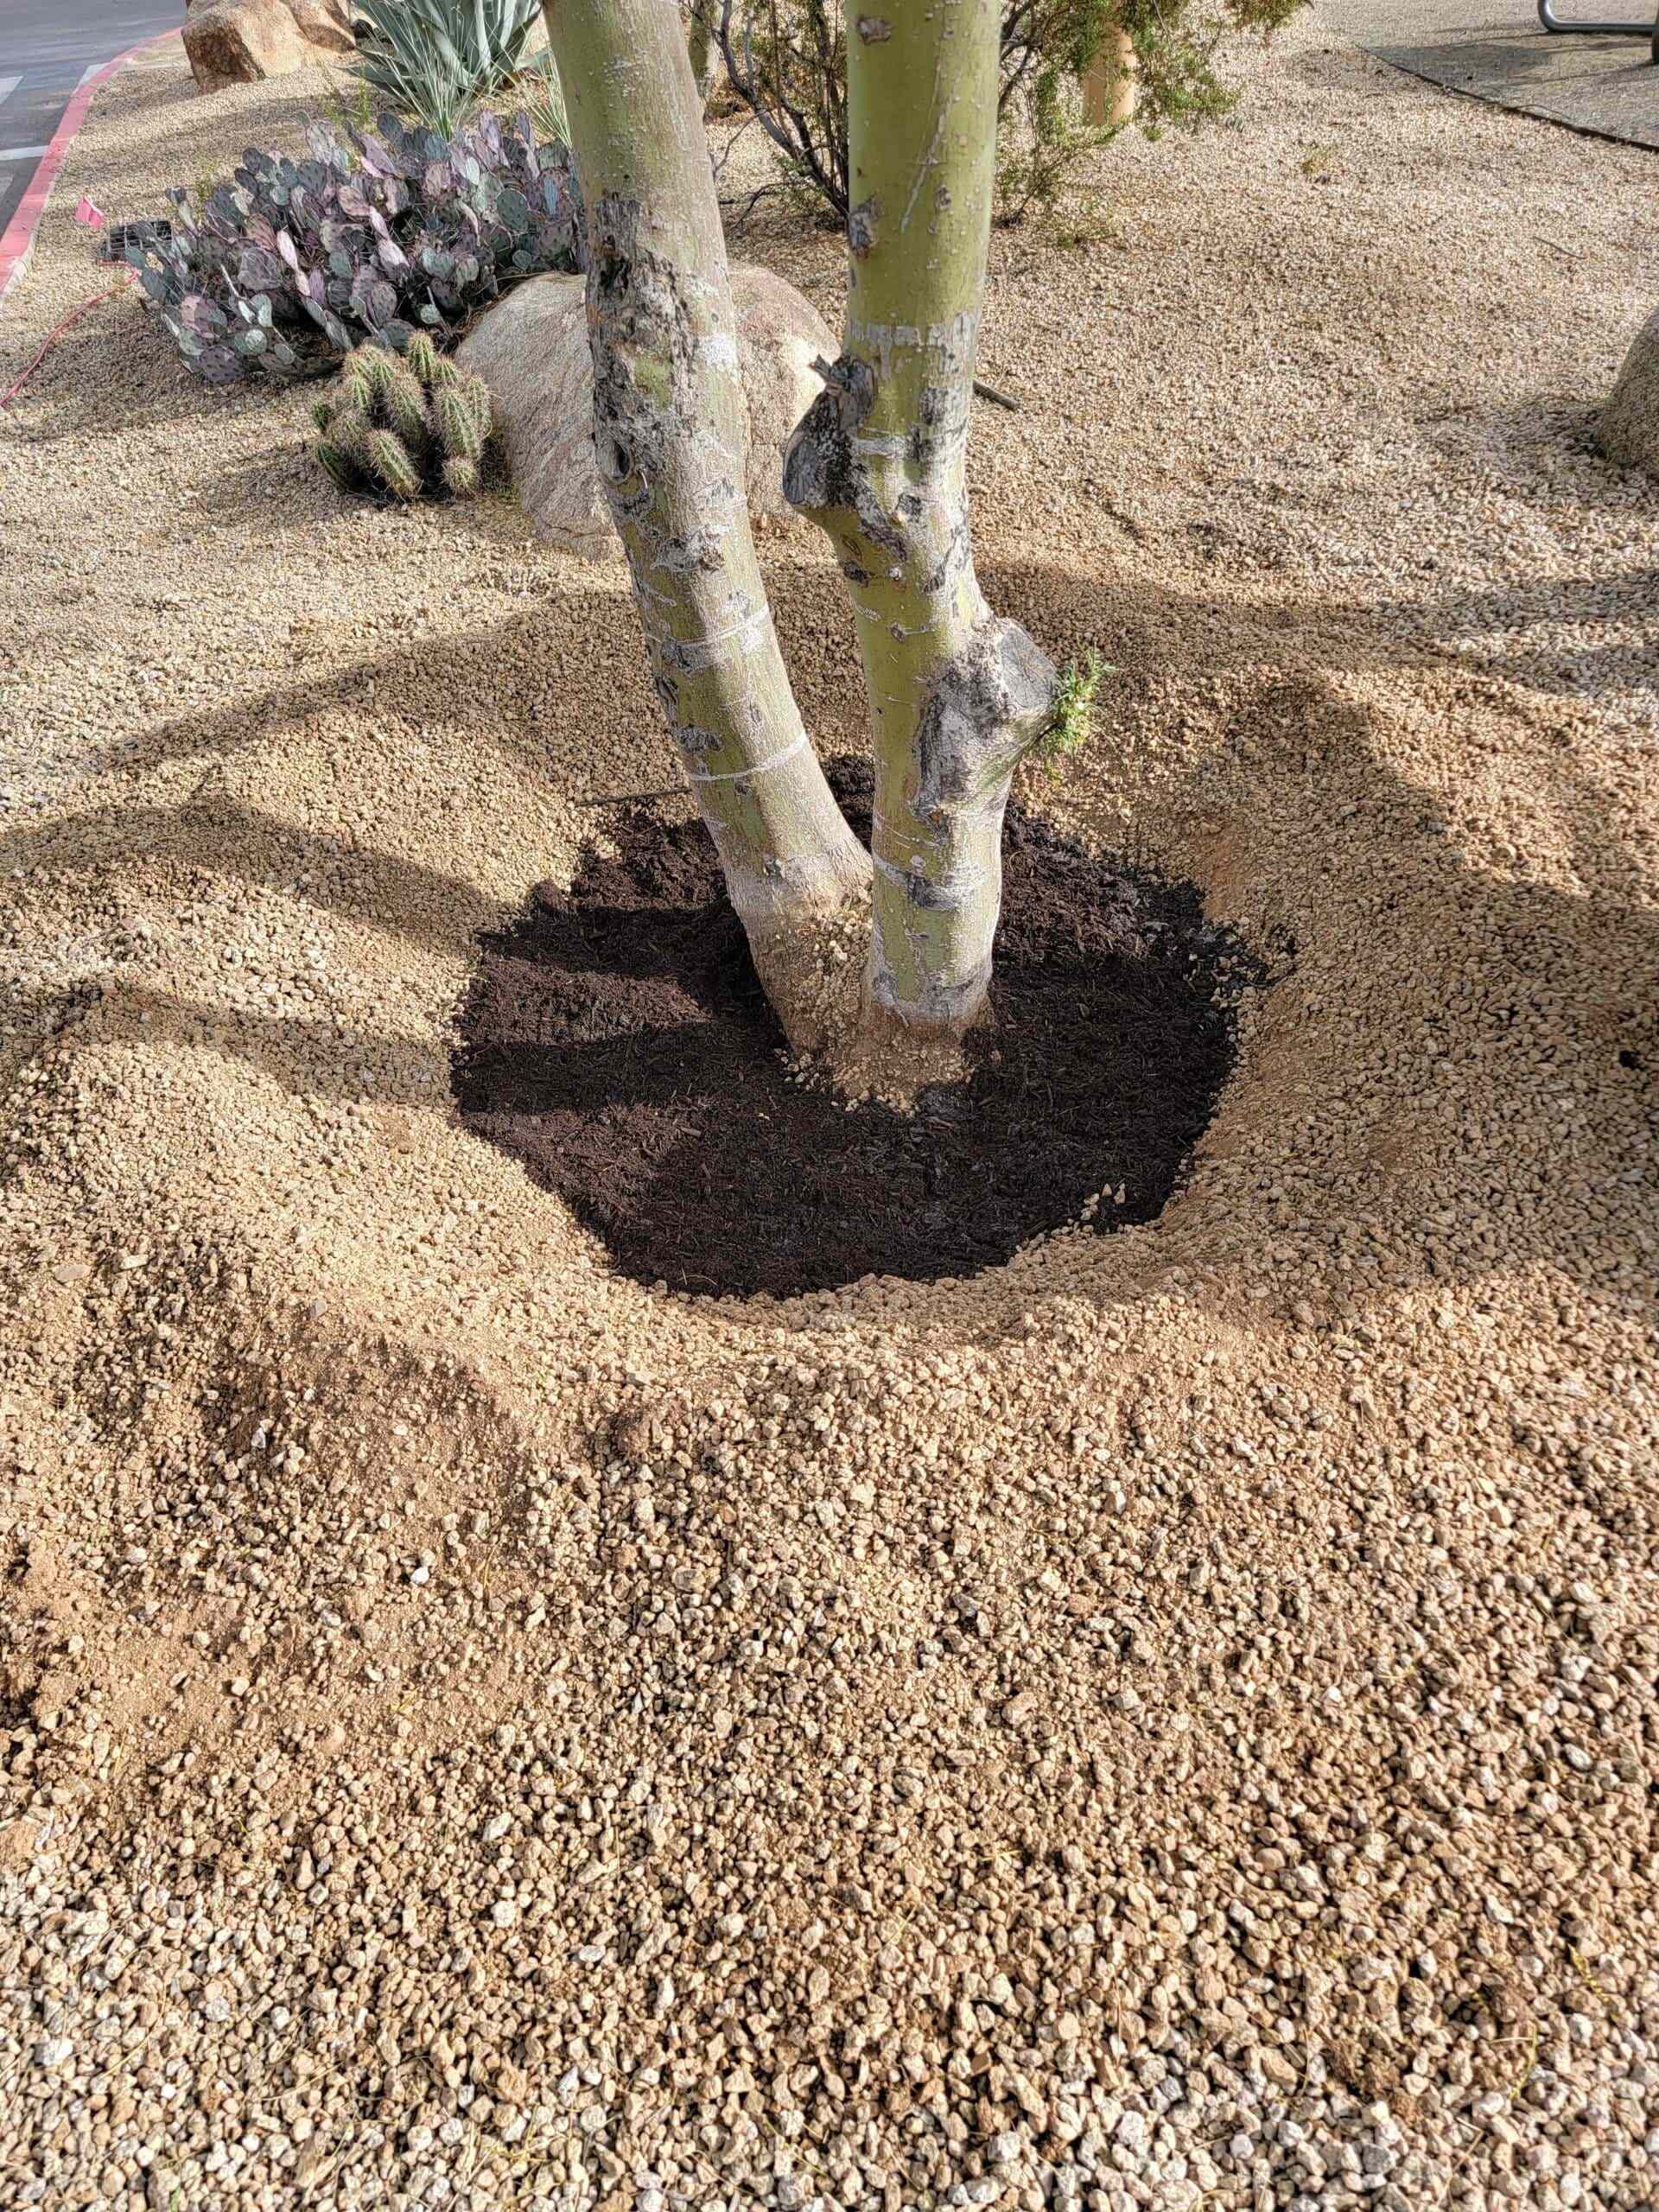 Tree planted to deep Solution